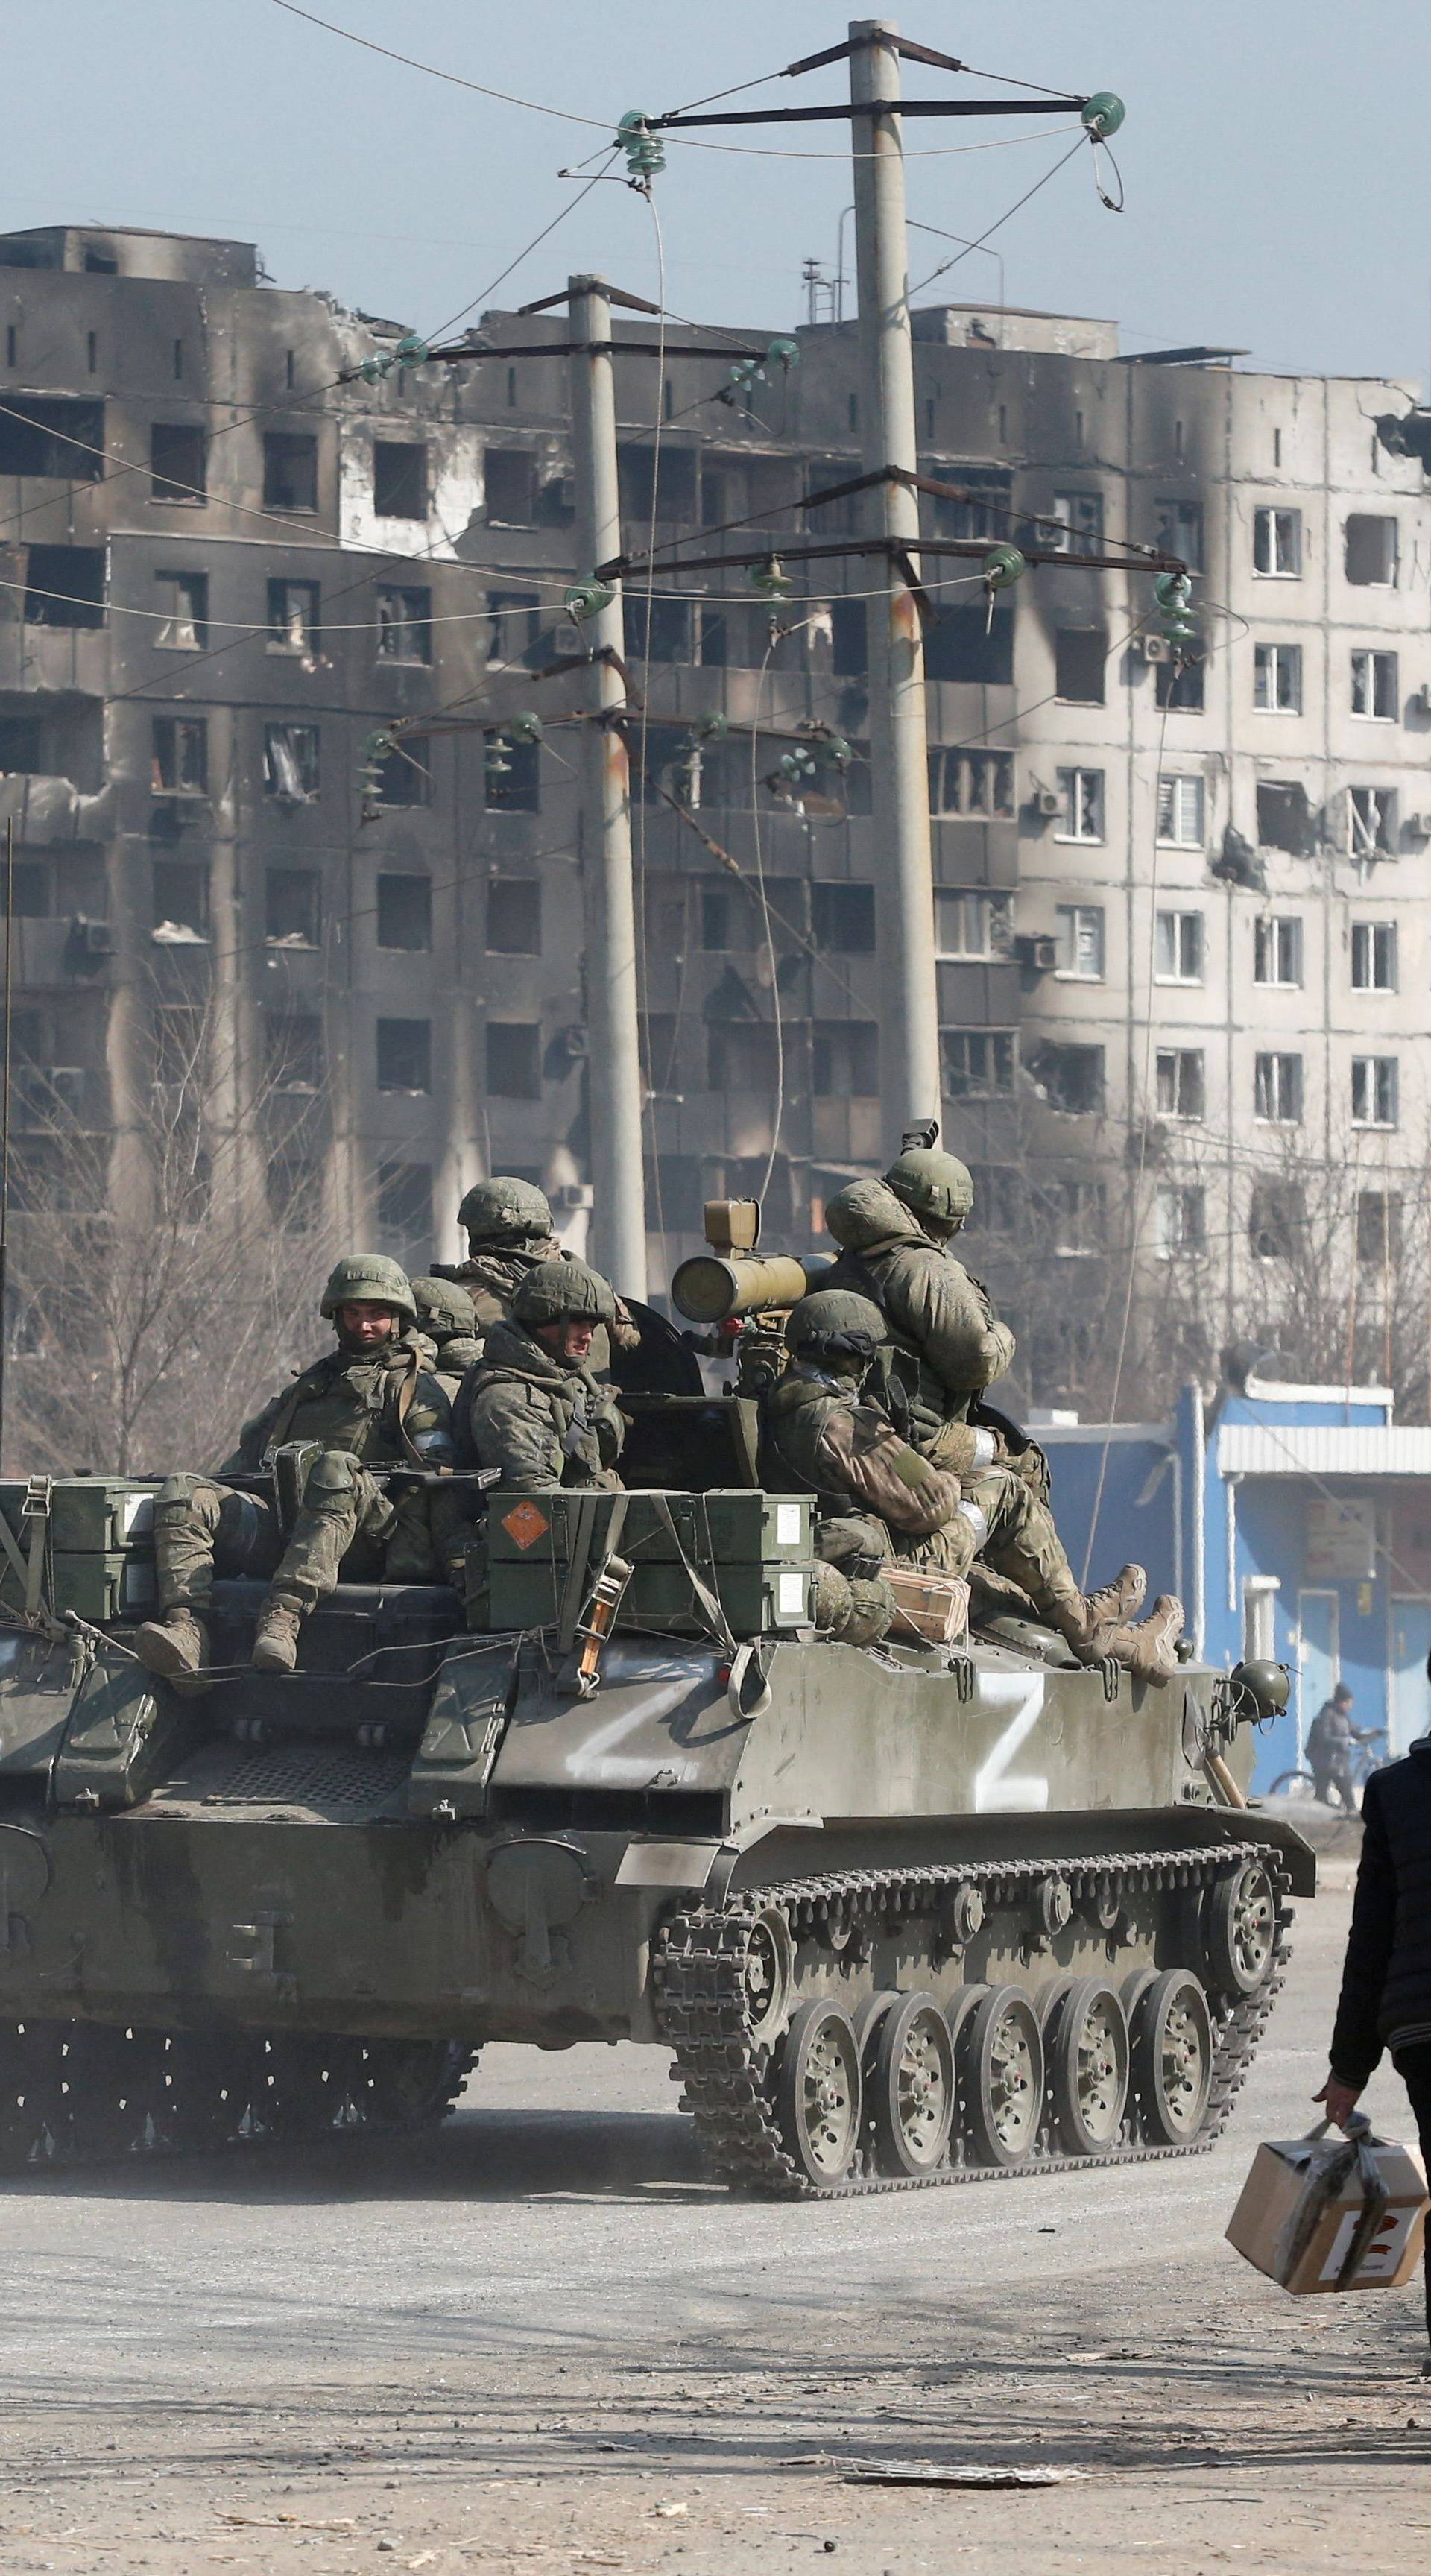 FILE PHOTO: Service members of pro-Russian troops are seen atop of an armoured vehicle in the besieged city of Mariupol